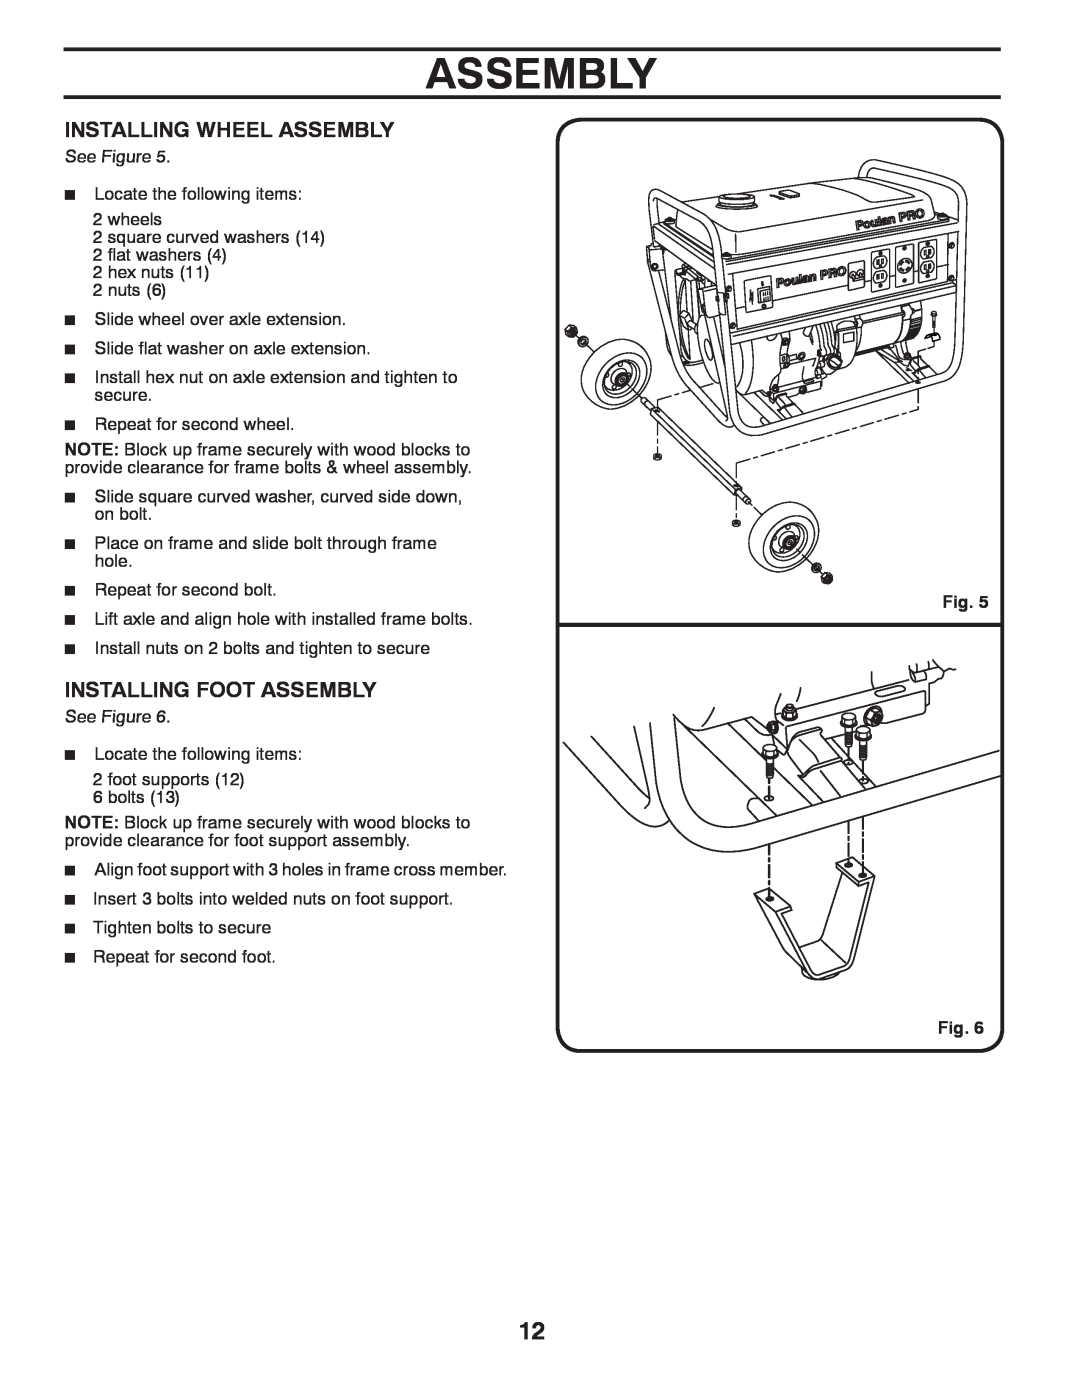 Poulan 420077 owner manual Installing Wheel Assembly, Installing Foot Assembly 